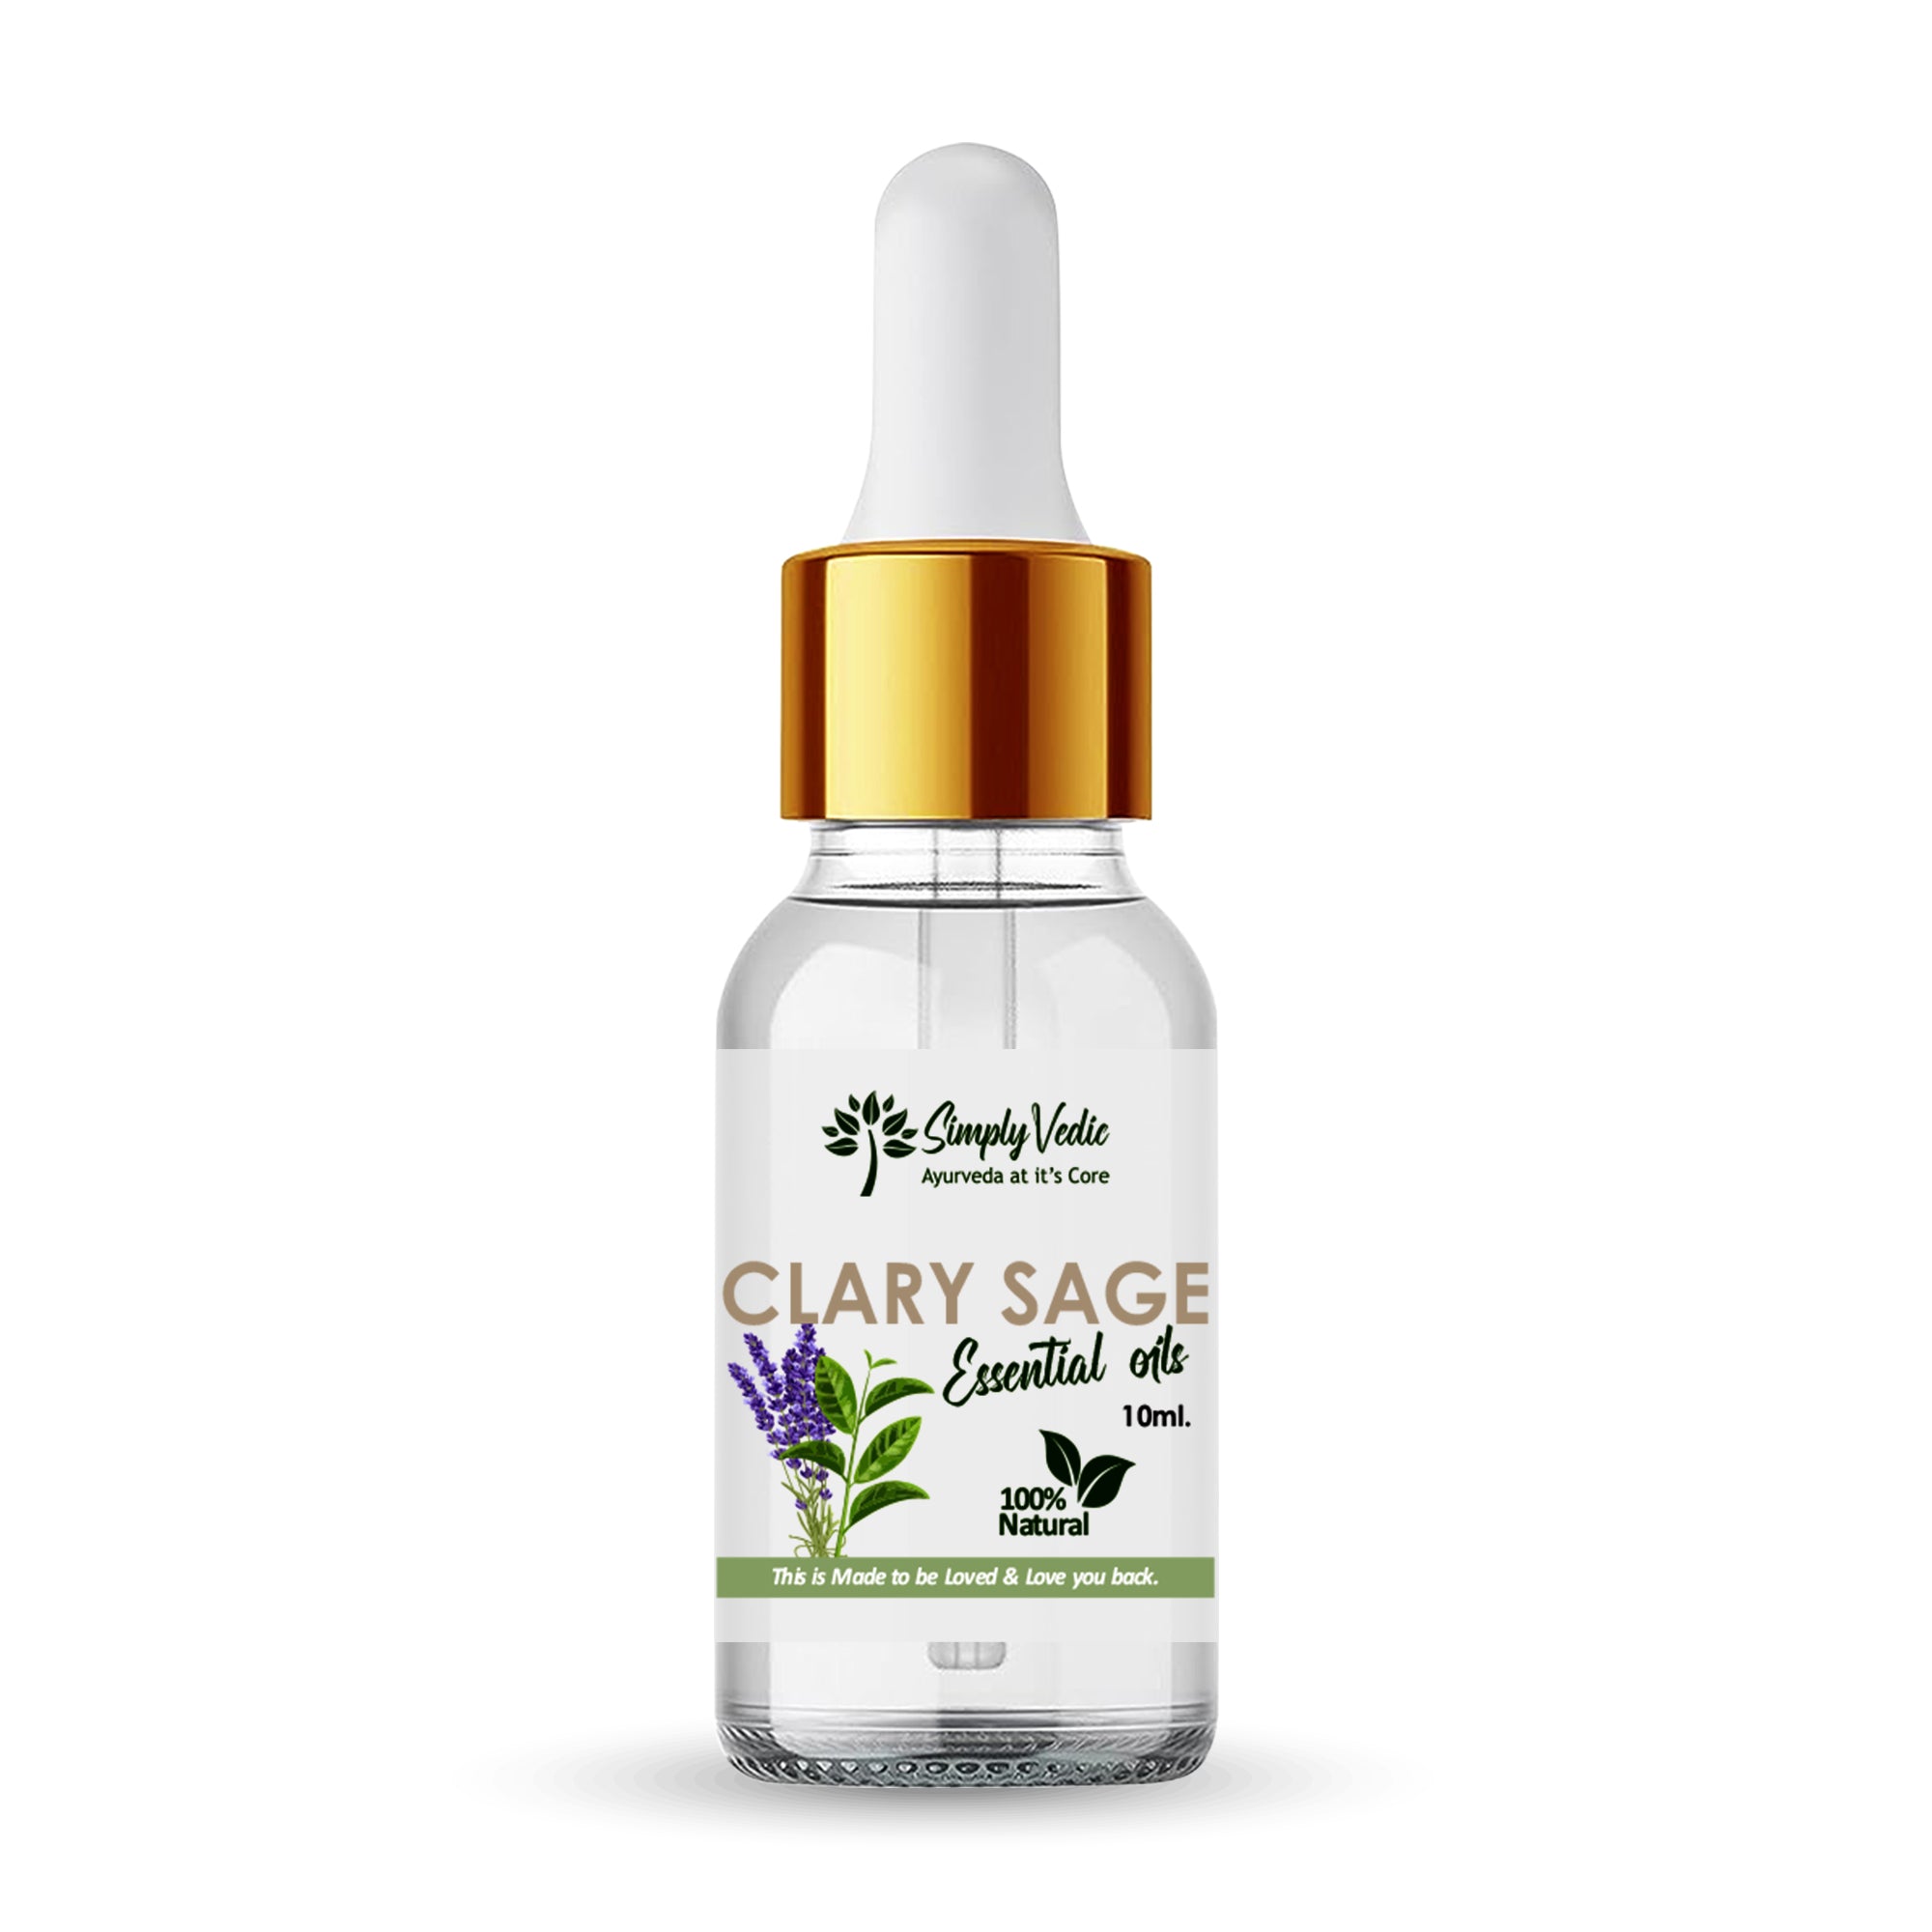 Simply Vedic Clary Sage Essential Oil